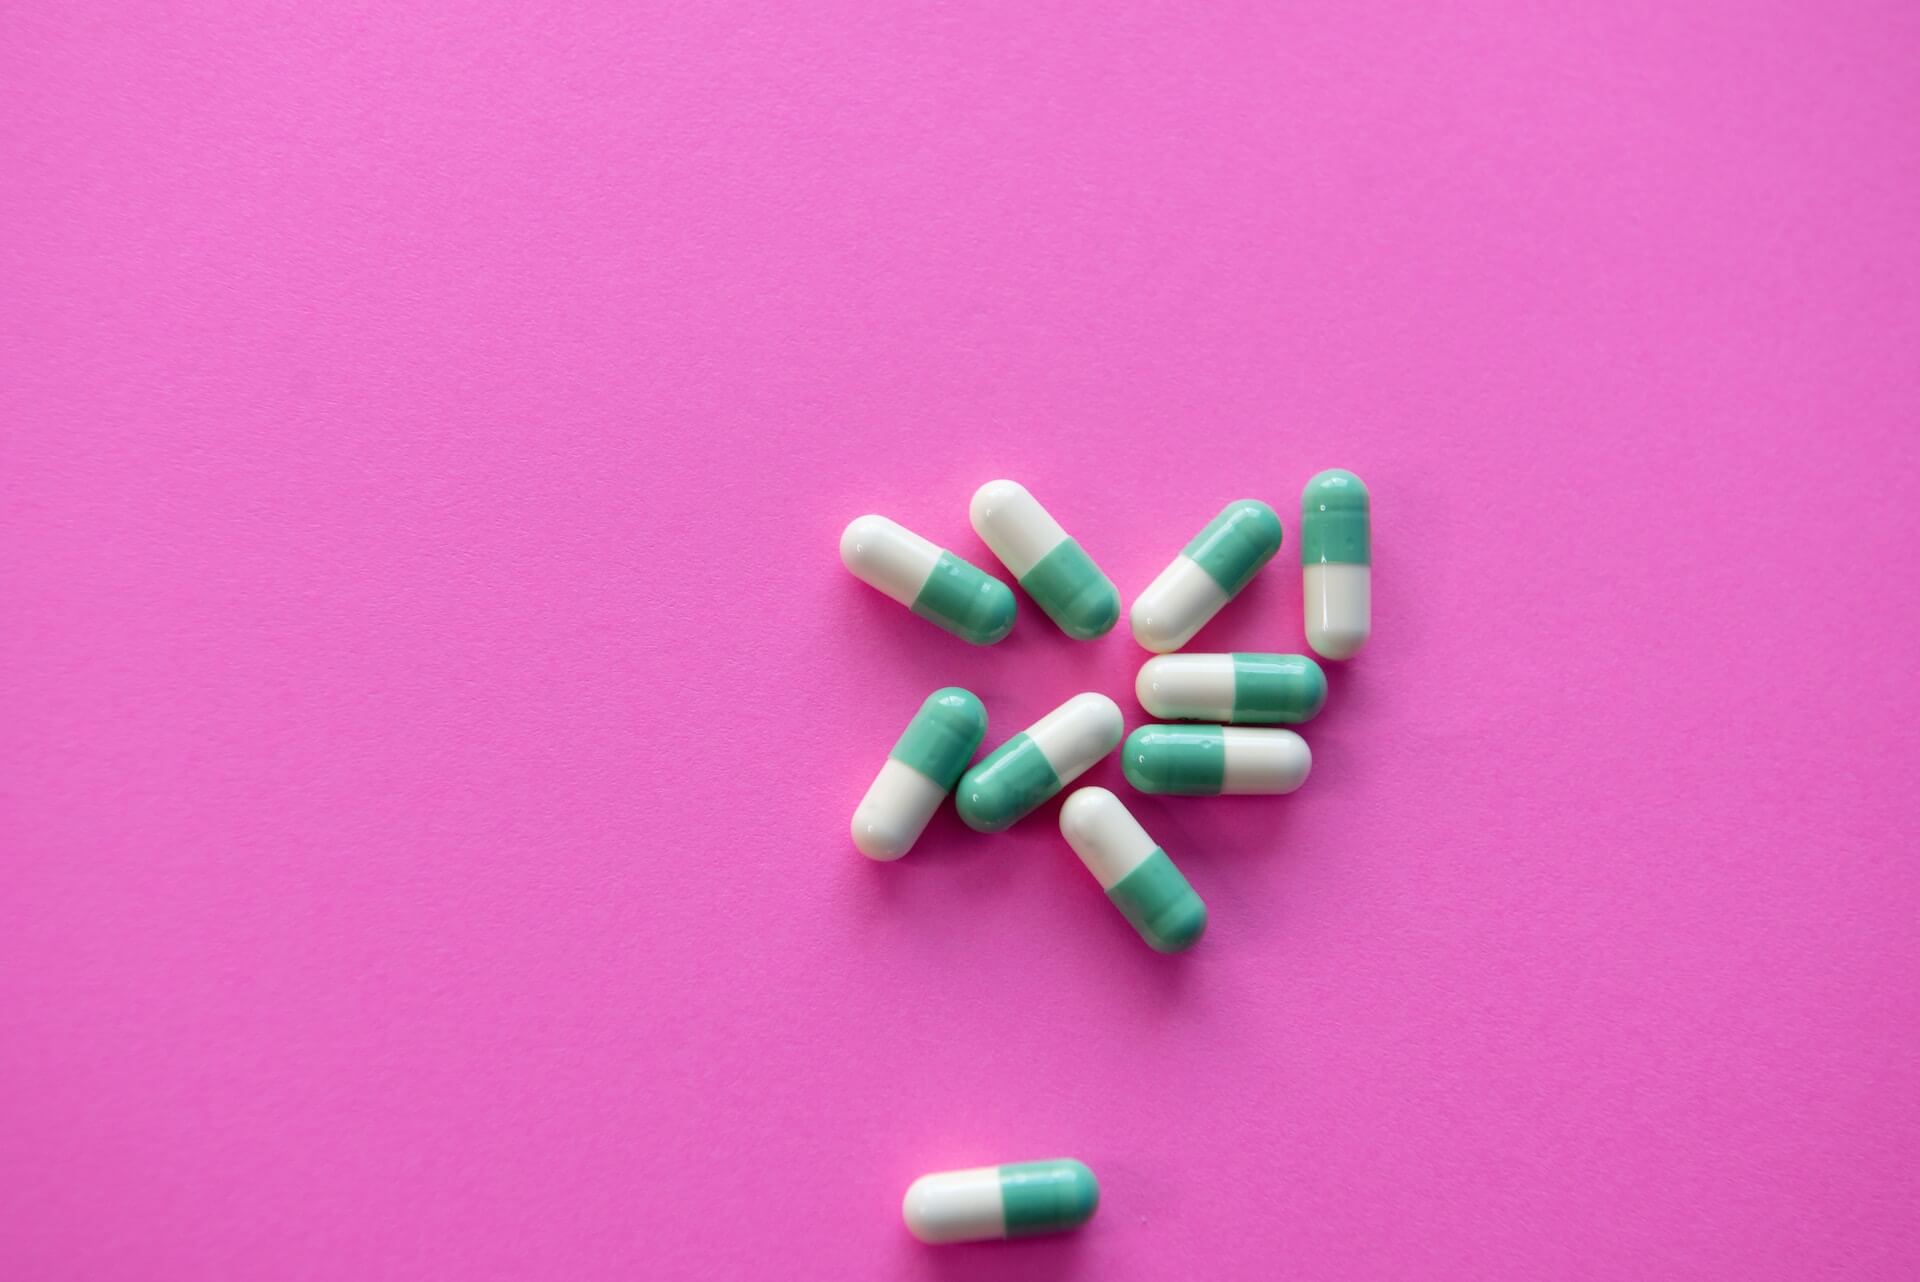 Pills against a pink background